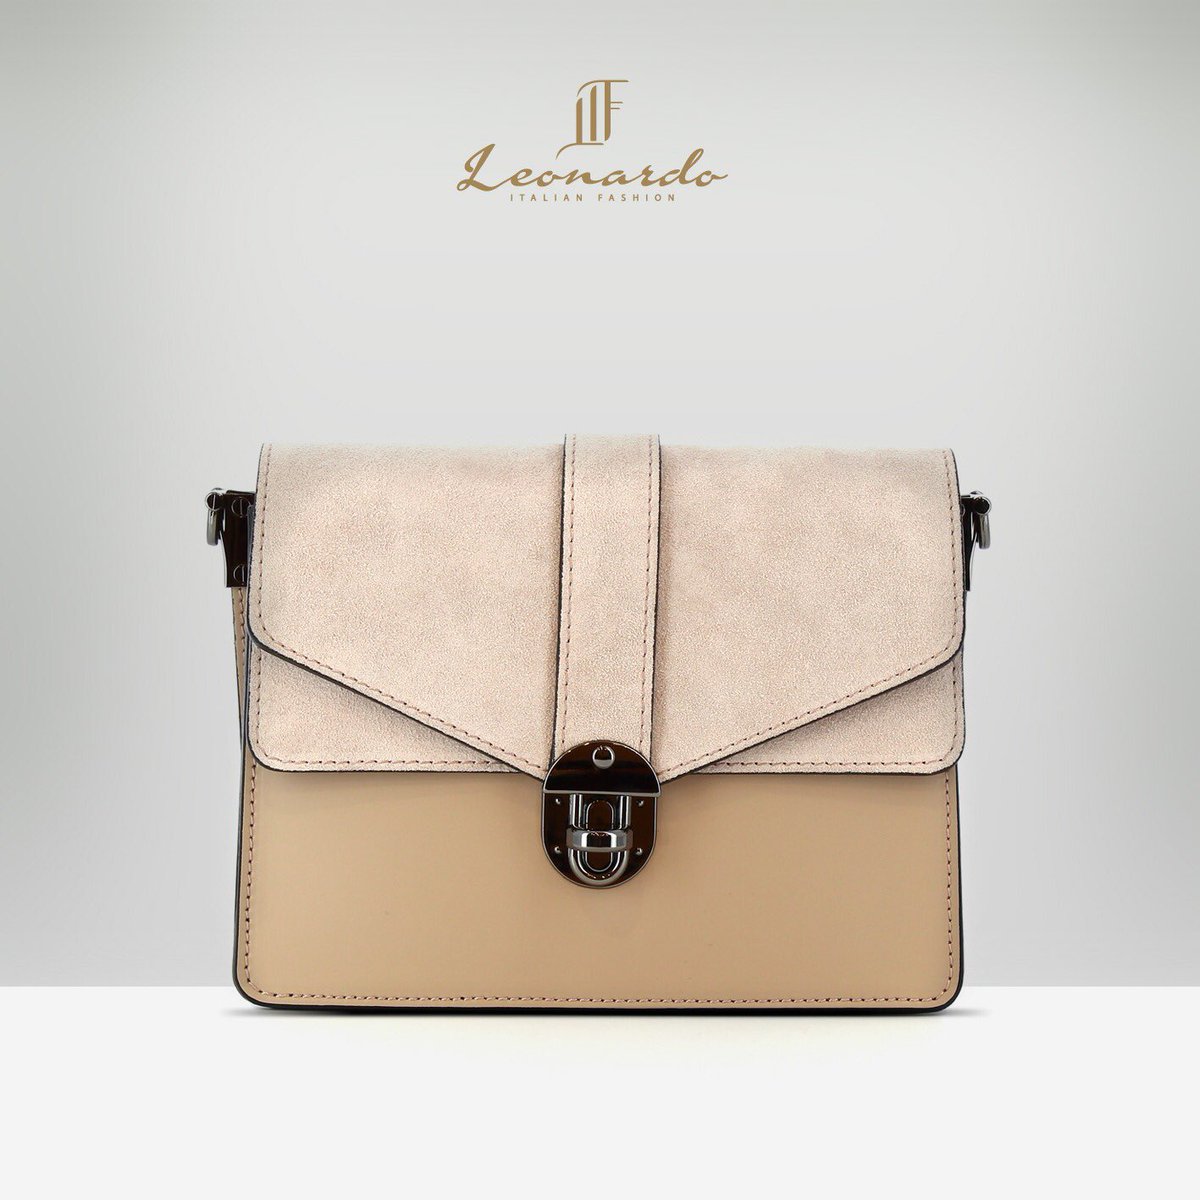 Starting 2020 with a fashionable note. 
Leonardo handmade Dusty calf leather & suede leather bags.

#leather #bags #calfleather #suedebag #leatherbags #womenbag #fashion #handmadeleather #italianfashion #onlineshop #rome #florence #usa🇺🇸 #illinois #california #newyork #london